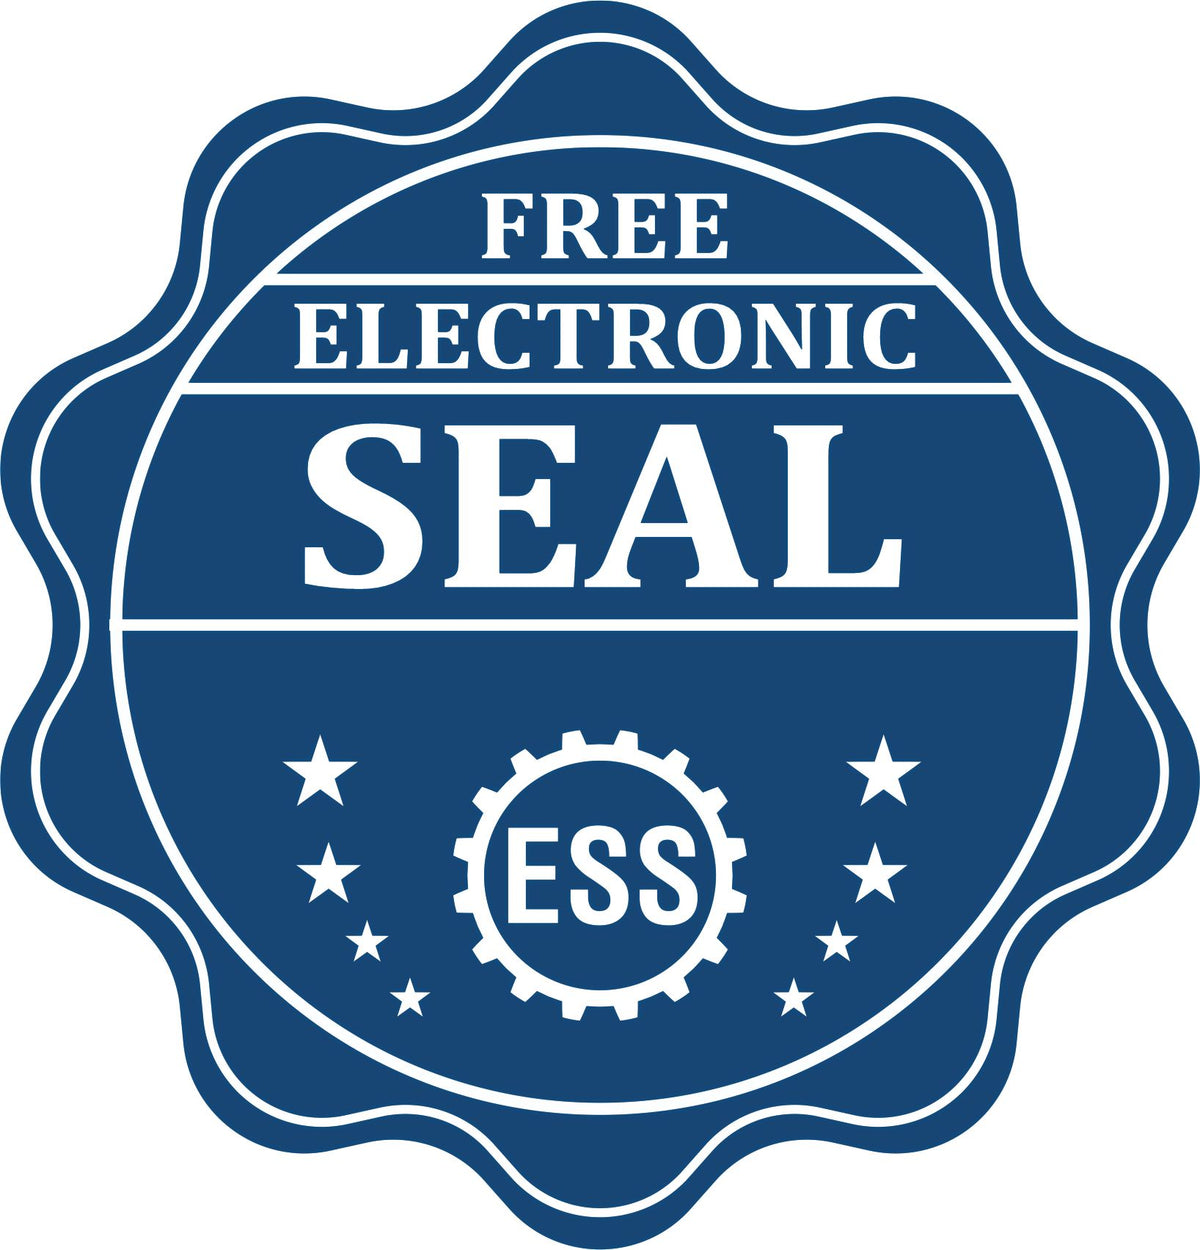 A badge showing a free electronic seal for the Slim Pre-Inked Colorado Architect Seal Stamp with stars and the ESS gear on the emblem.